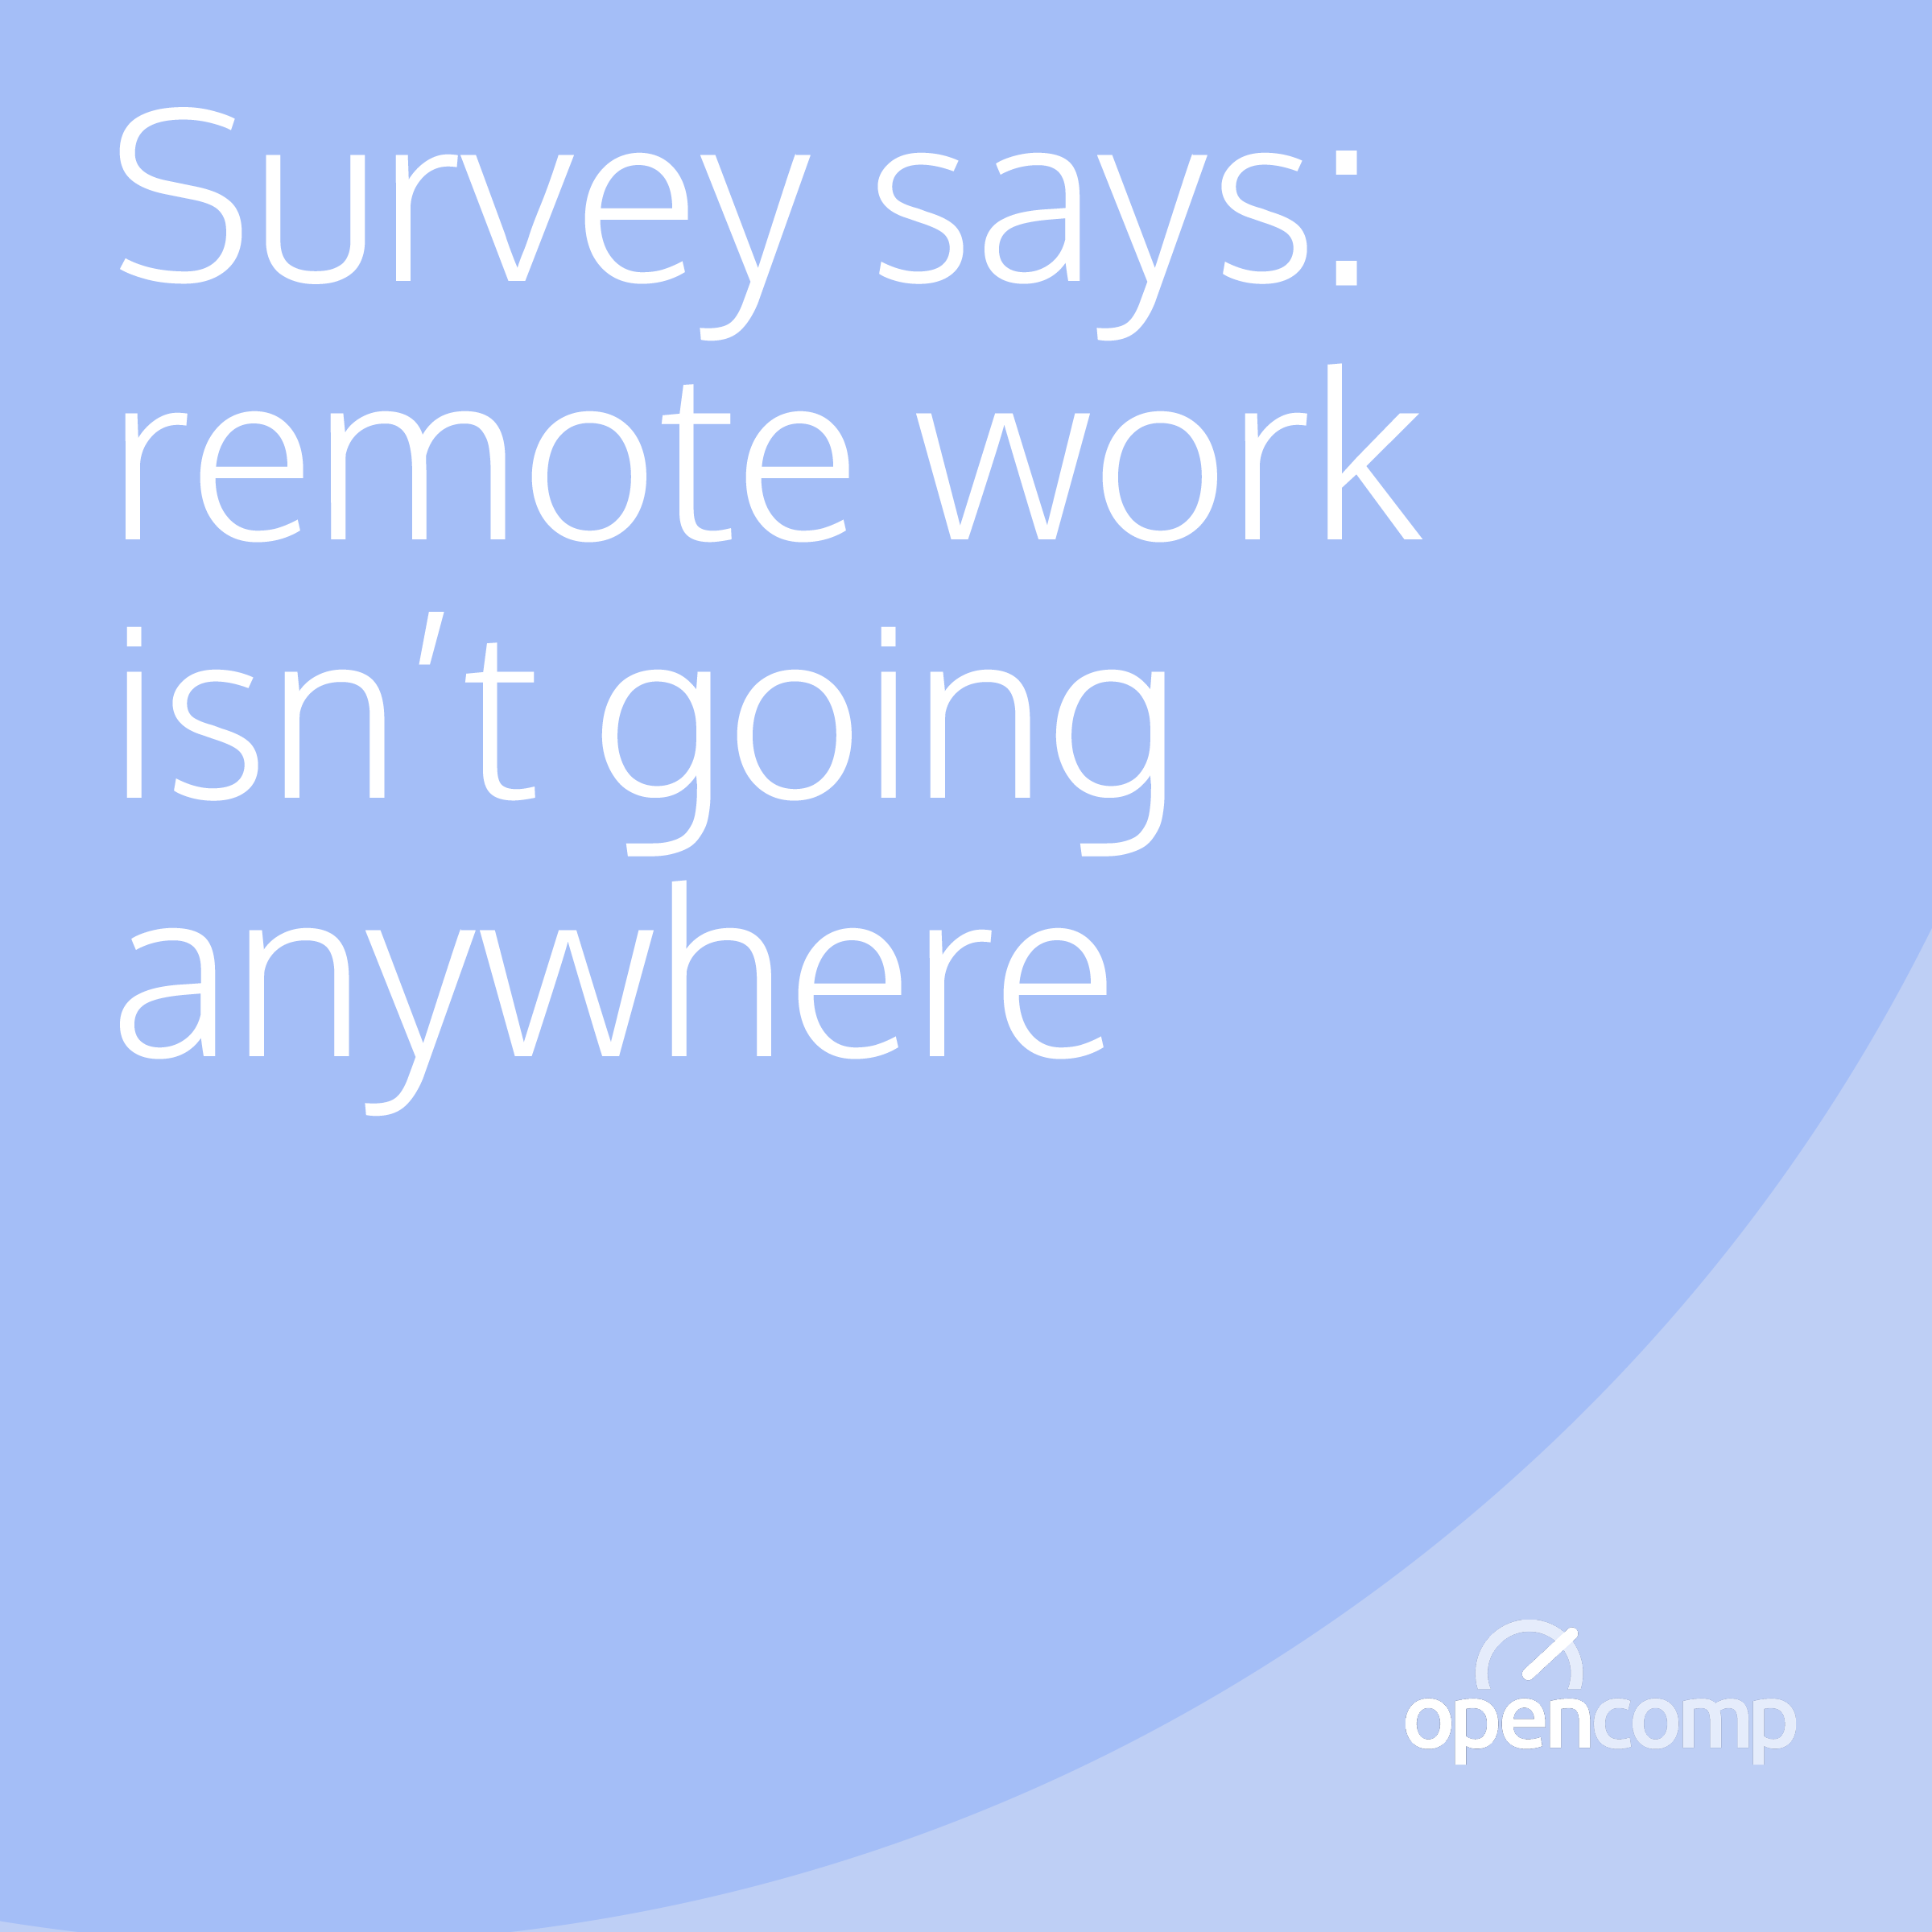 Remote Work is Here, Do Your Compensation Practices Compare?